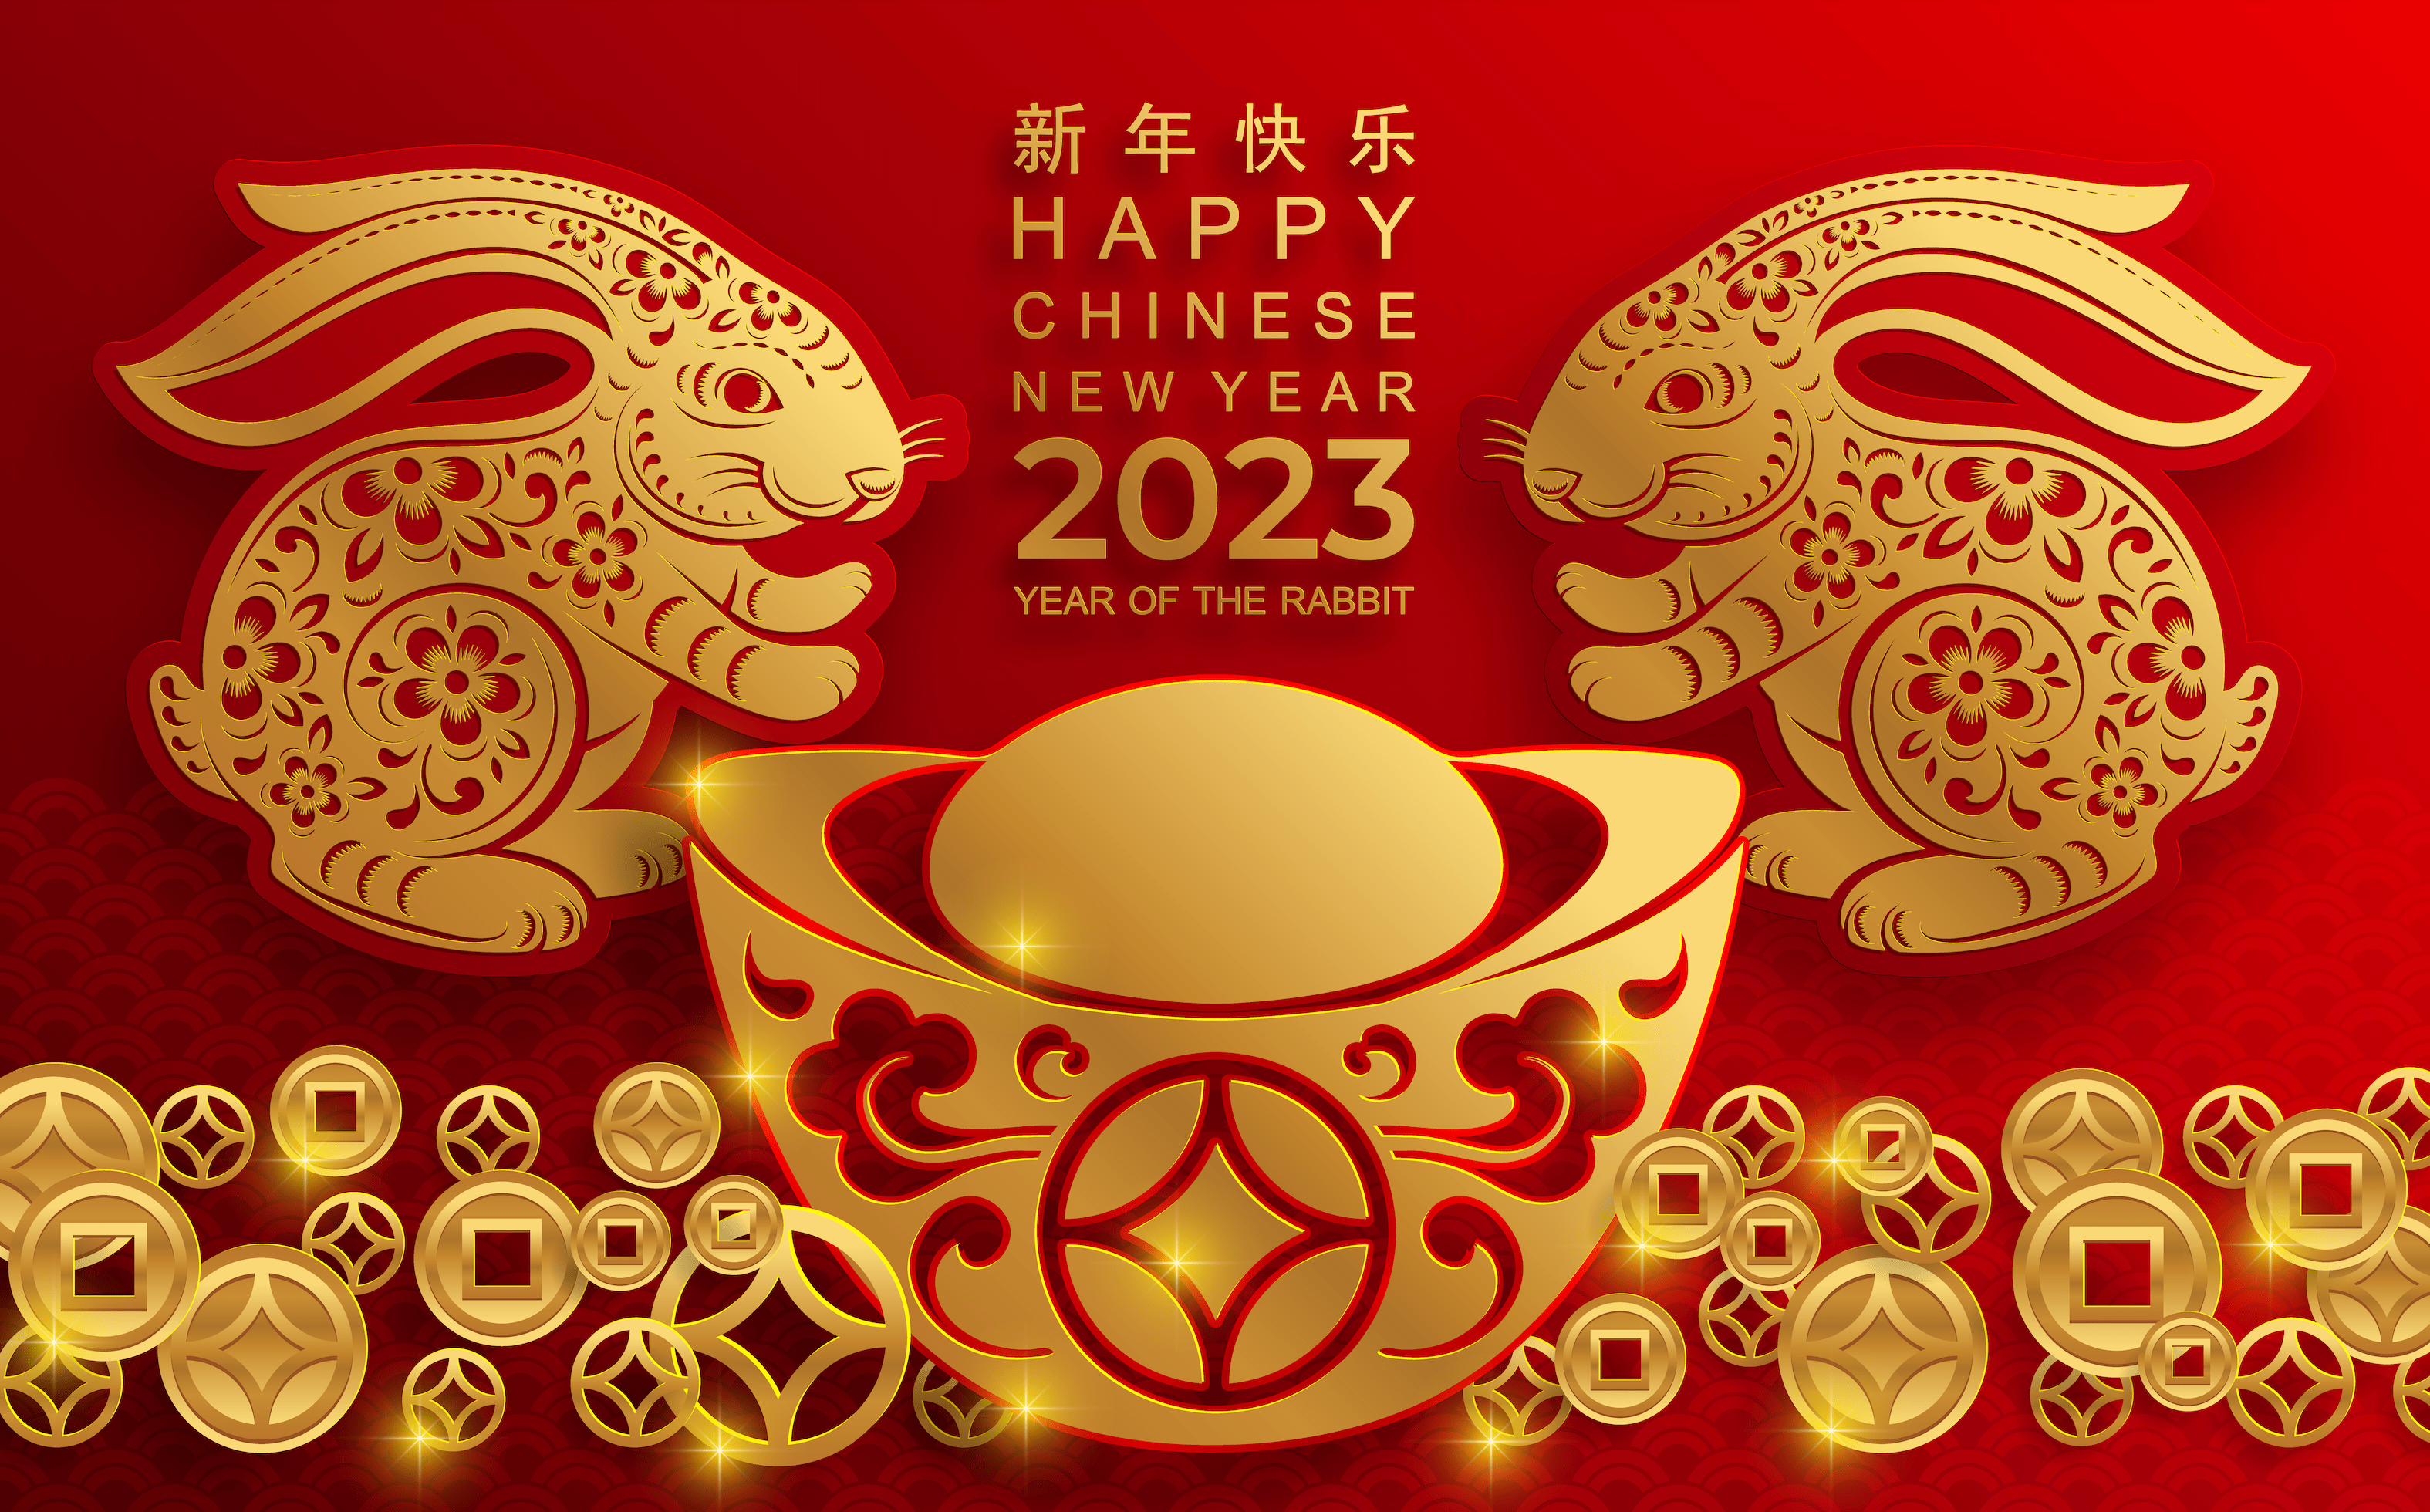 Yan Chang on Twitter To welcome the arrival of the Chinese Lunar Year of  the Rabbit Tesla China has designed four mobile wallpapers celebrating the  New Year httpstcorz4gZ4x8iN  Twitter